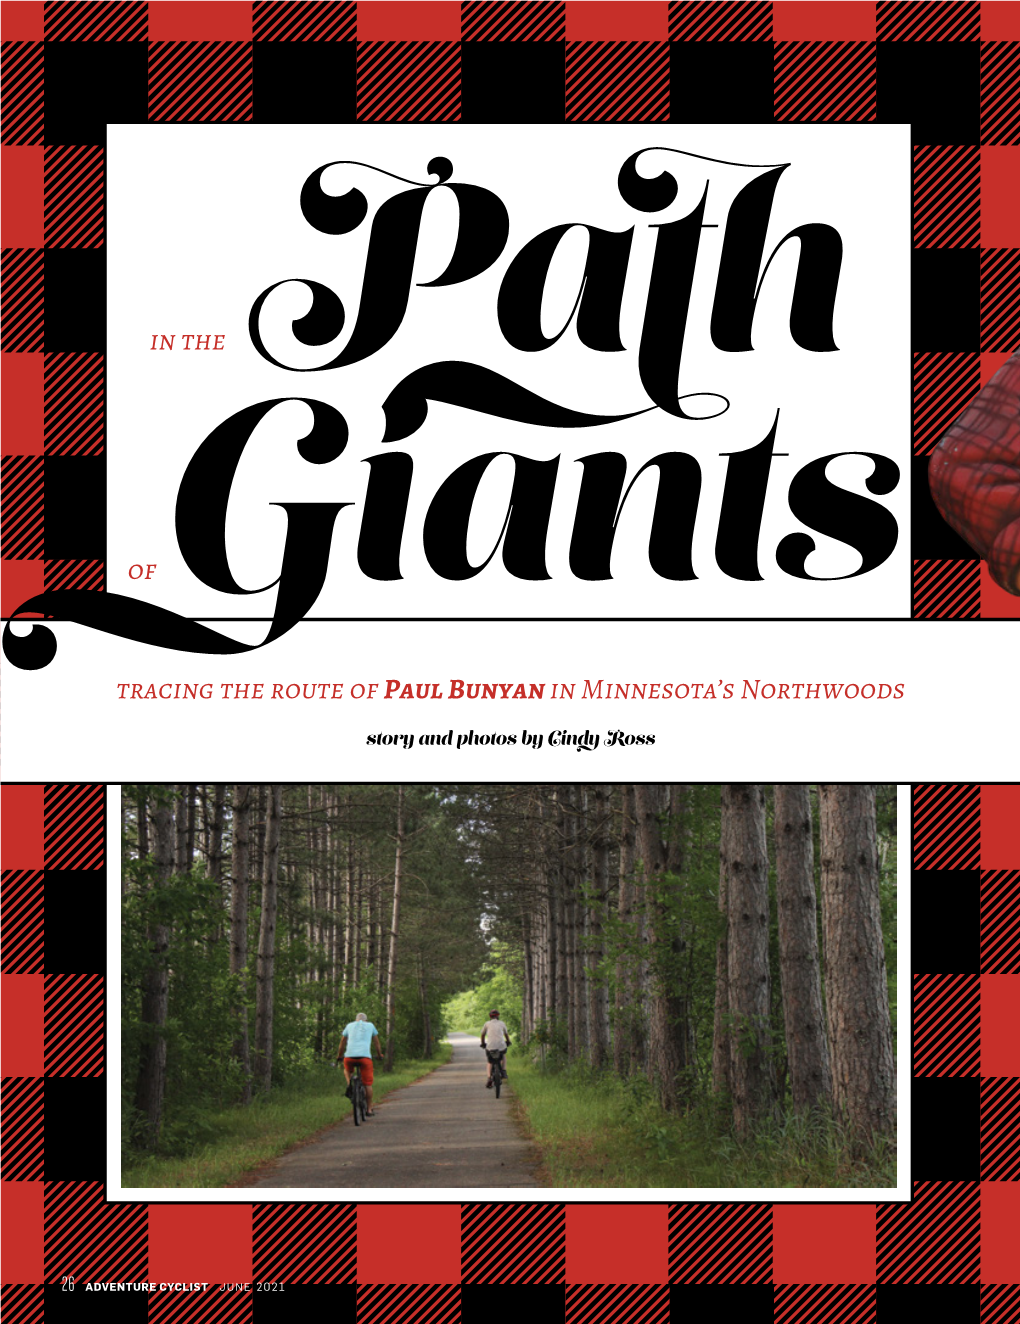 In the of Tracing the Route of Paul Bunyan in Minnesota's Northwoods